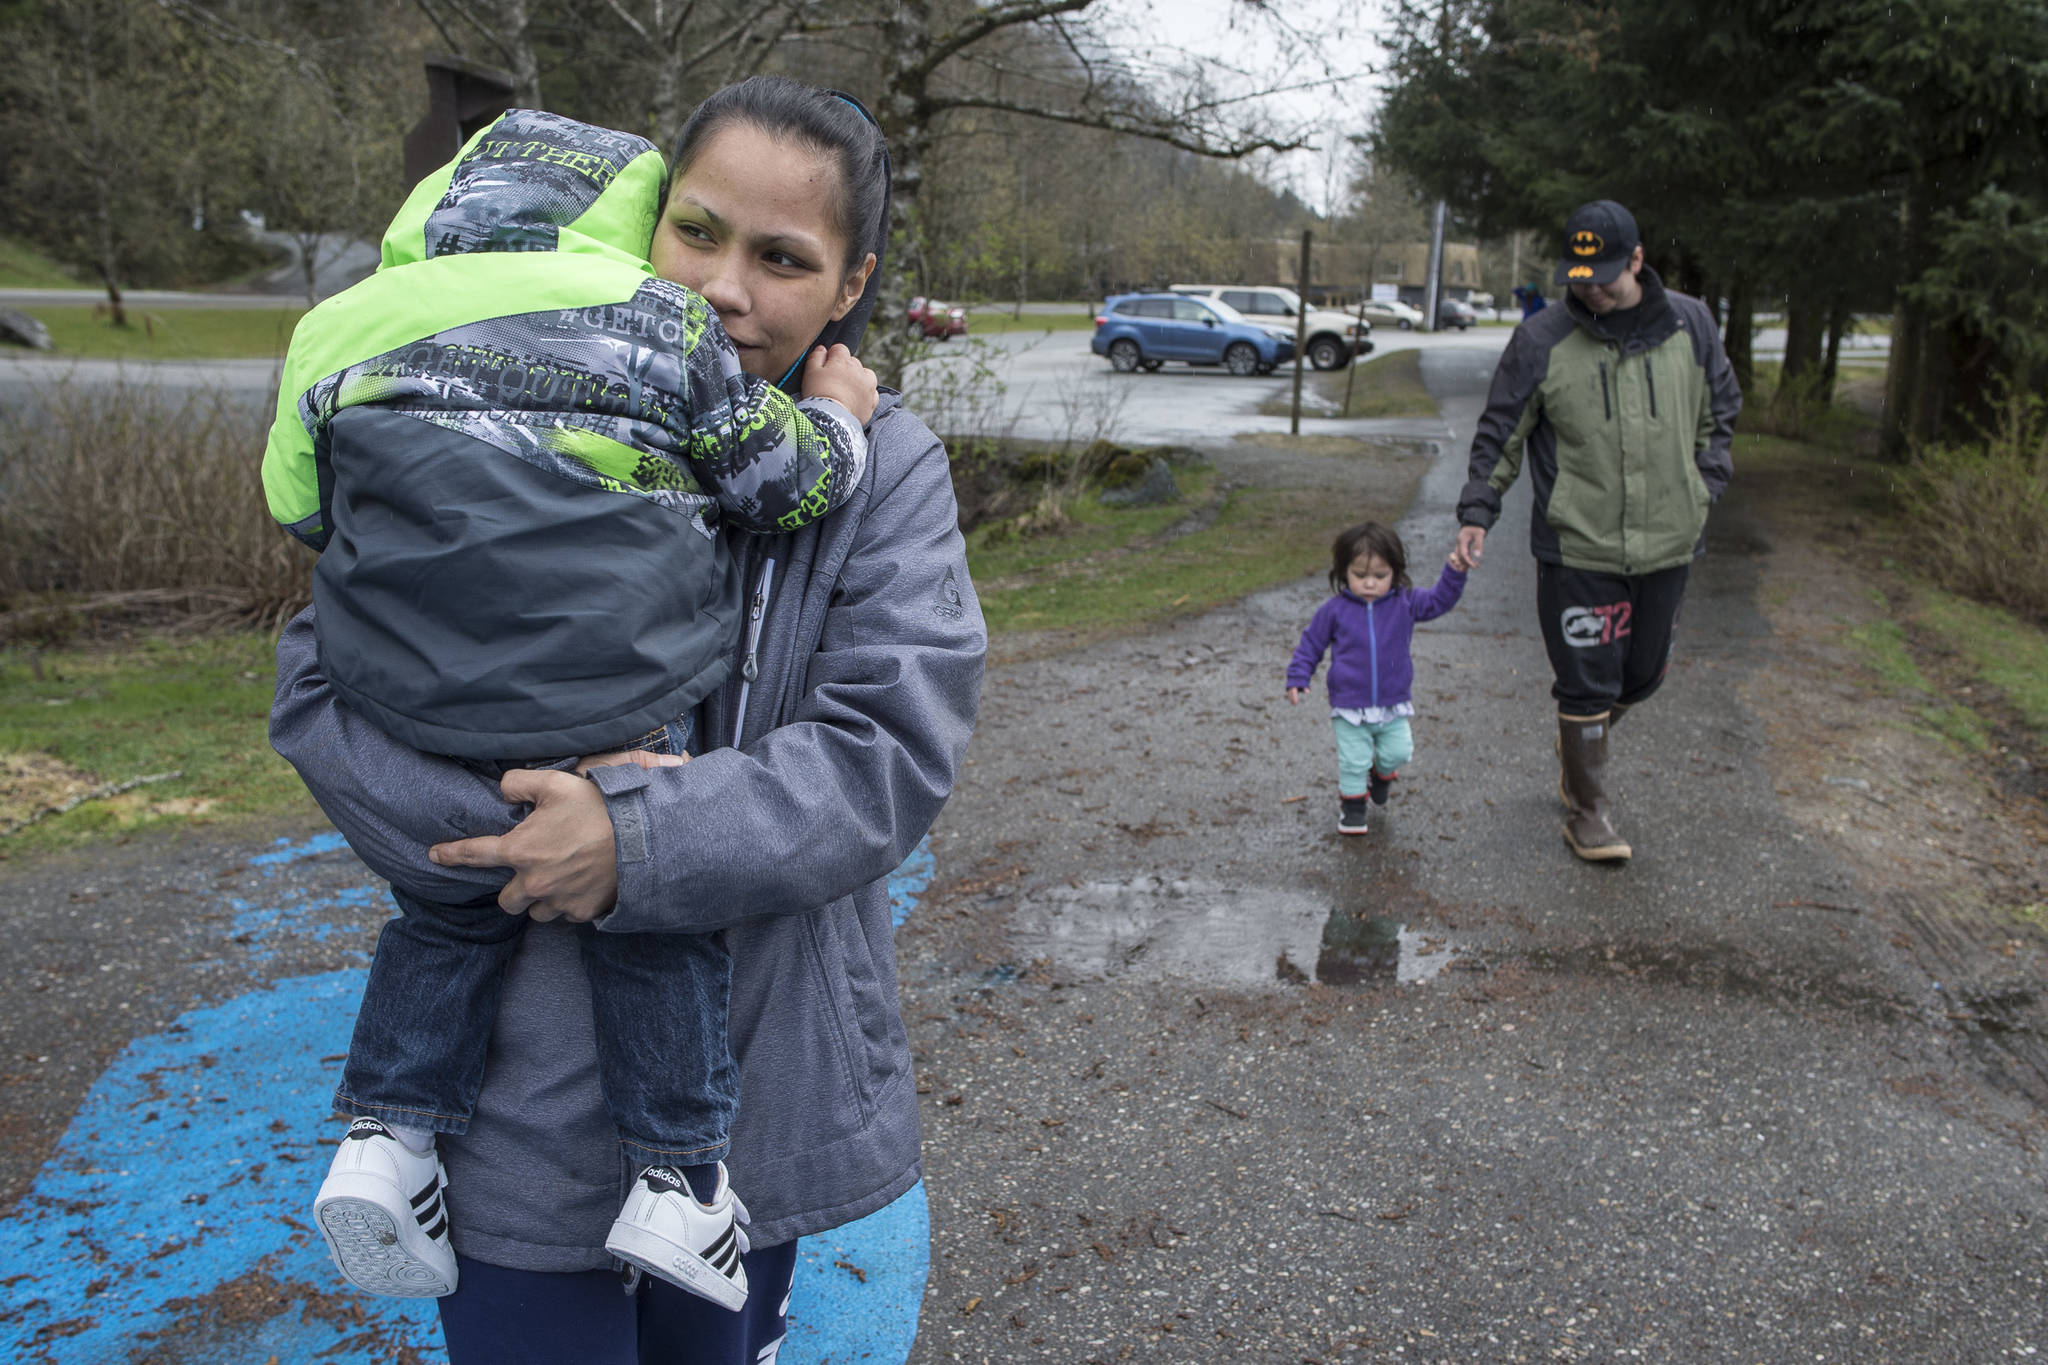 Mary and Steve Littlefield walk to the playground with their children on Wednesday, April 24, 2019. (Michael Penn | Juneau Empire)